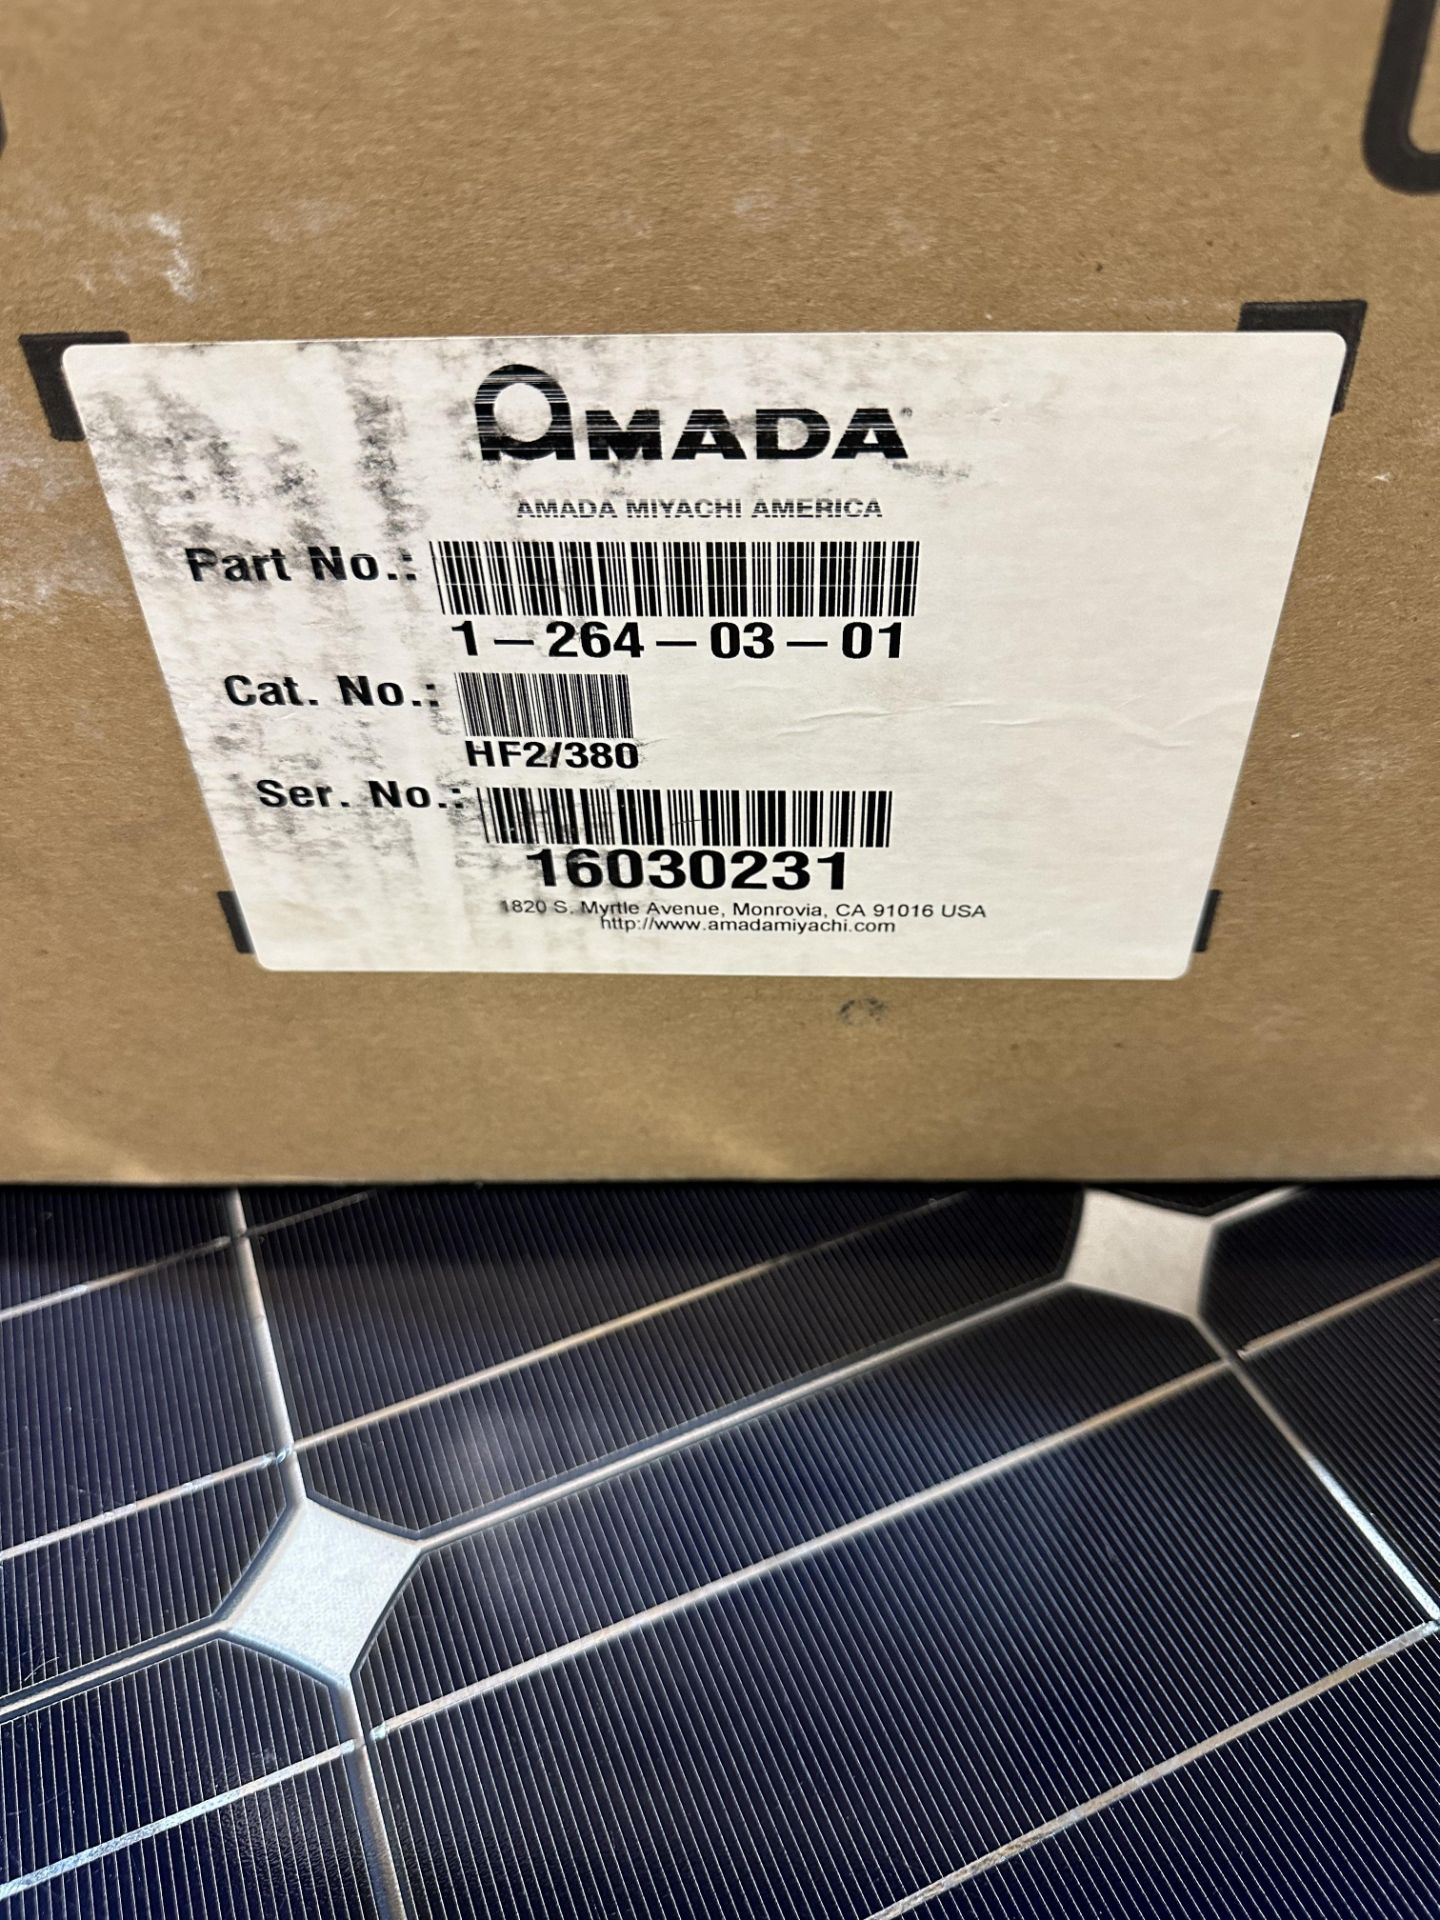 NEW IN BOX - AMADA MIYACHI HF2/380 HIGH FREQUENCY INVERTER WELDING CONTROL - Image 8 of 8